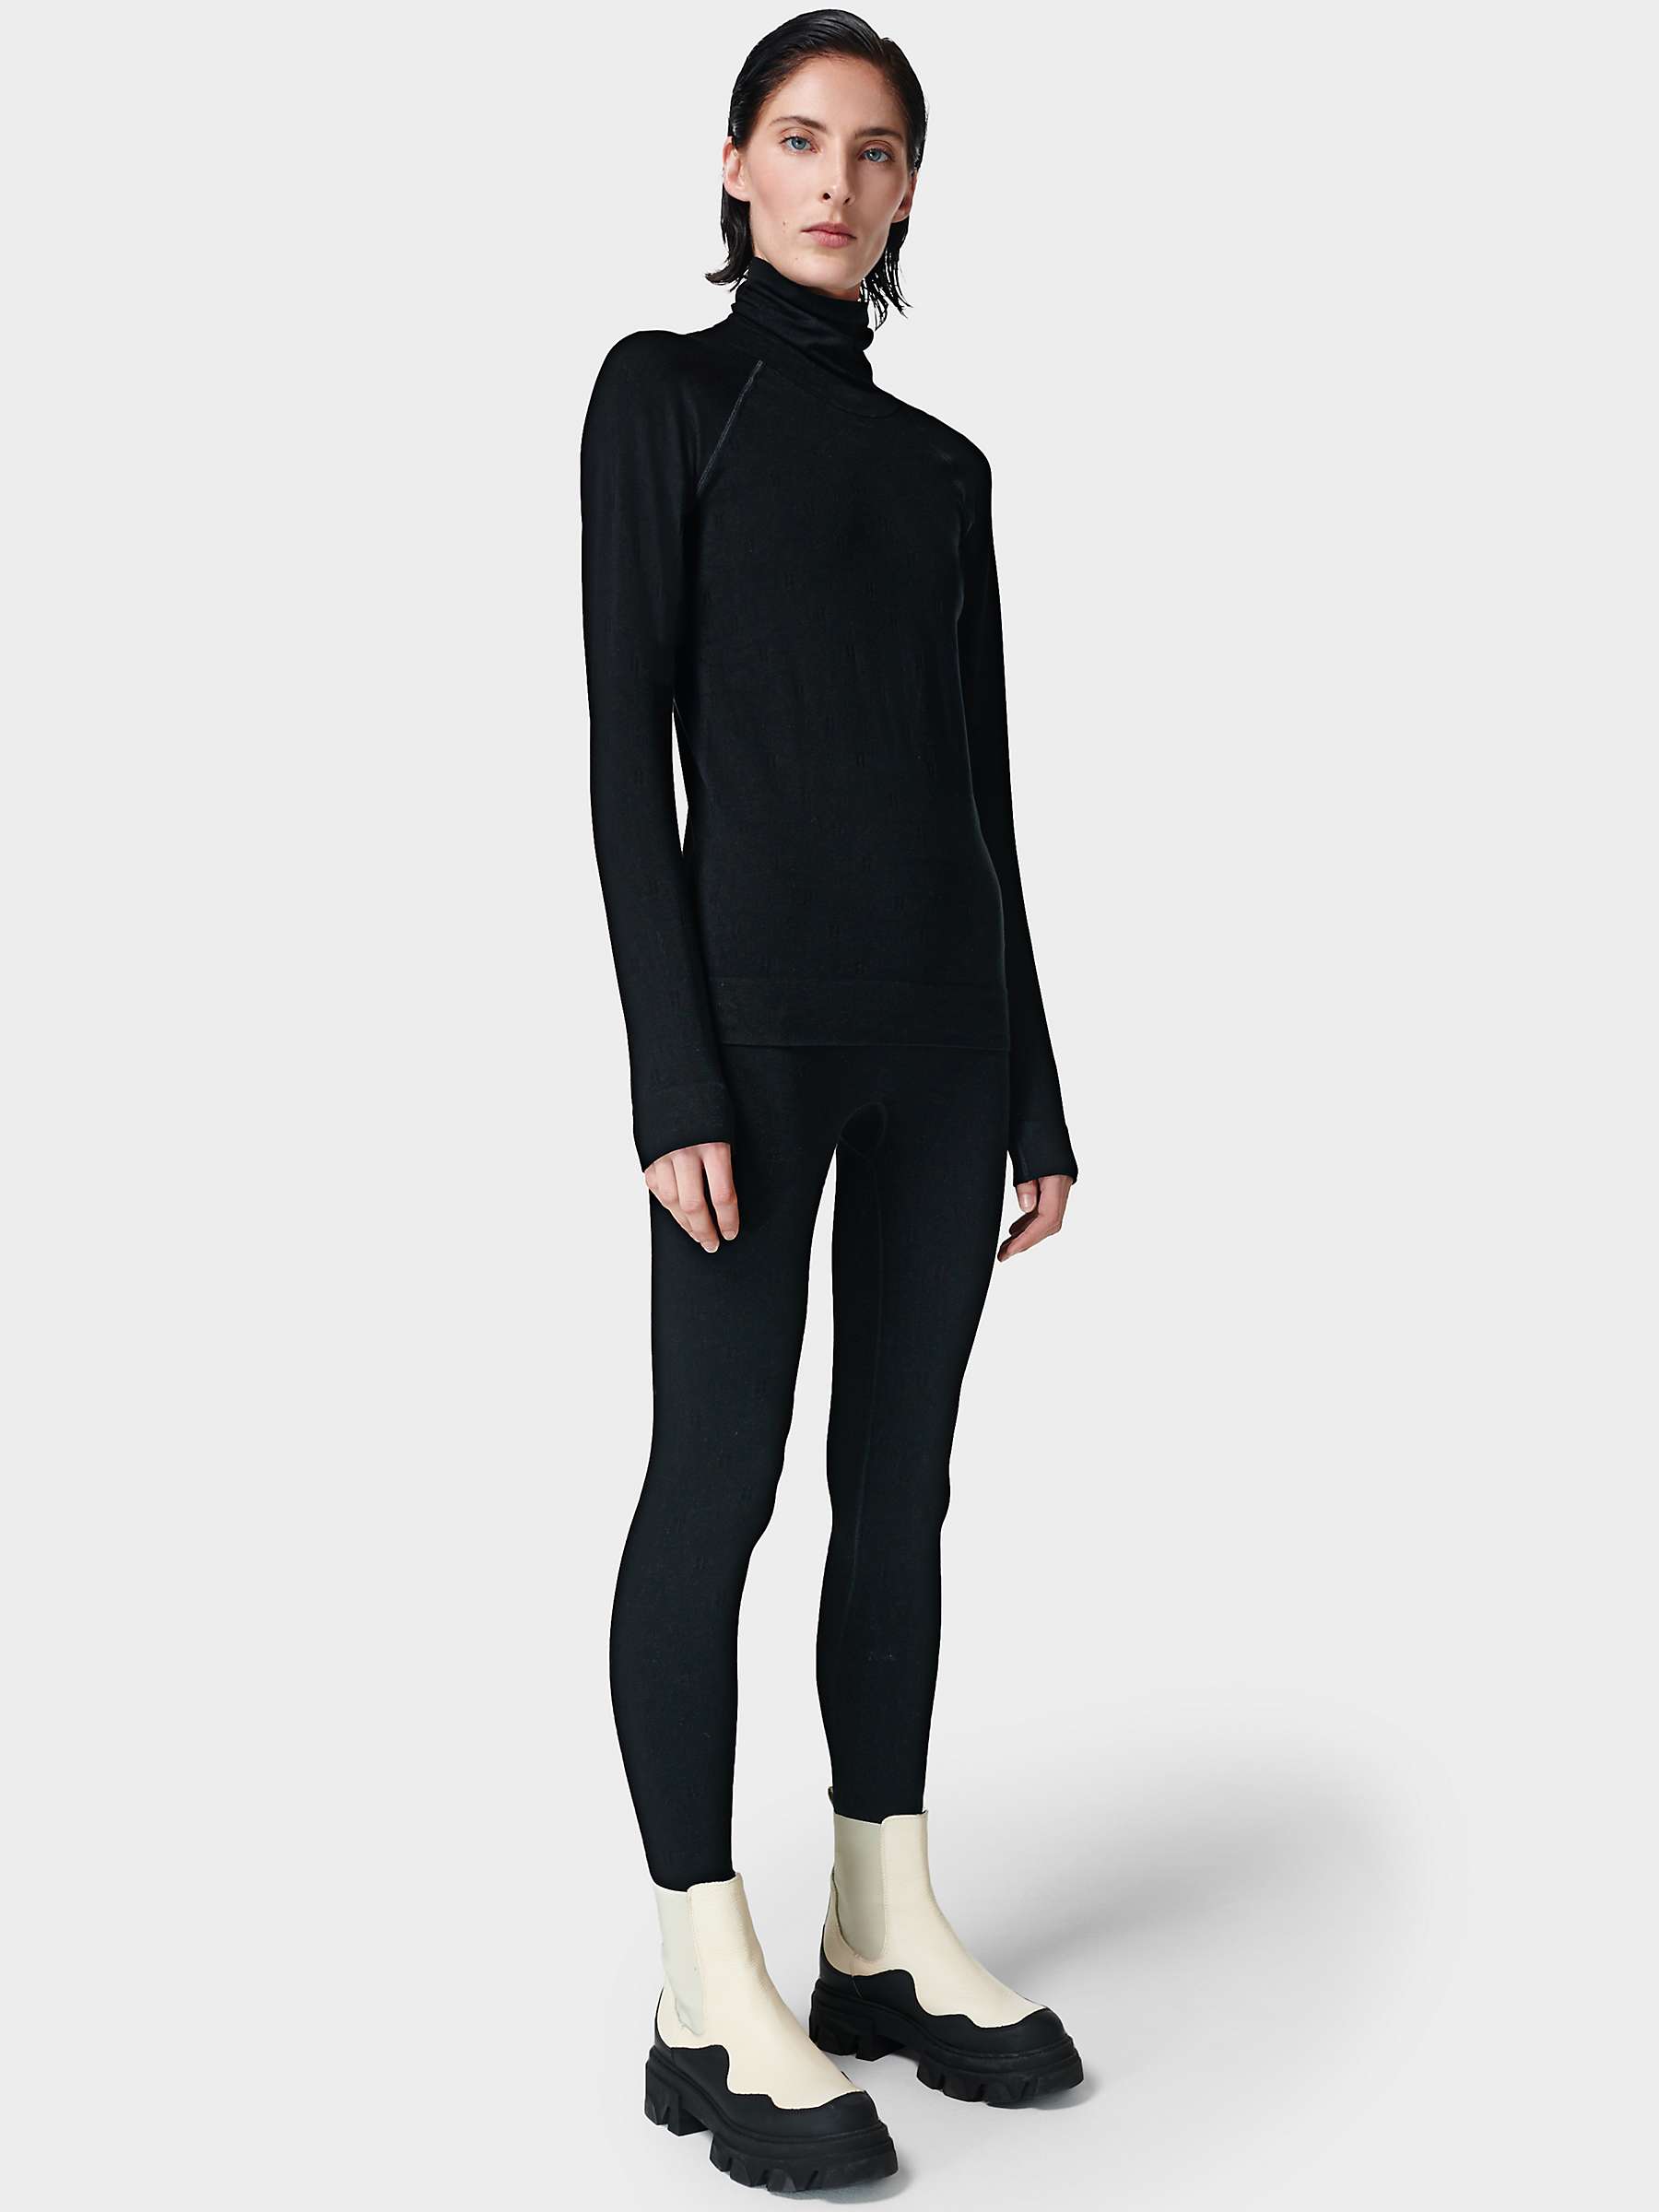 Sweaty Betty Funnel Neck Base Layer Top, Black at John Lewis & Partners